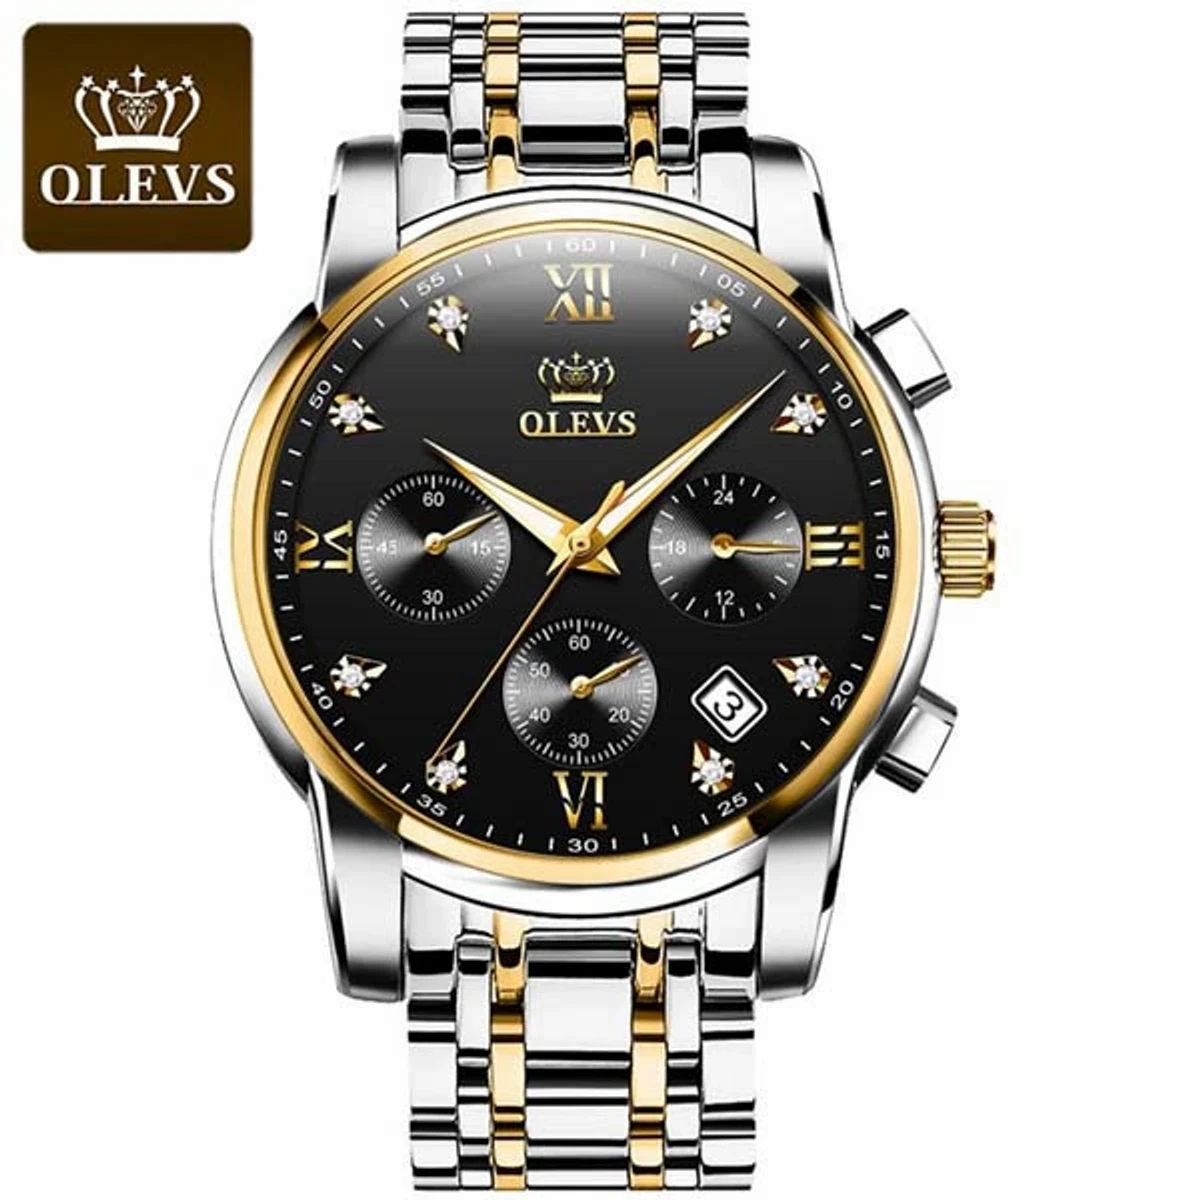 OLEVS MODEL  Watch for Men Stainless Steel Watches TOTON AR DIAL BLACK ROUND GOLDEN - MAN WATCH